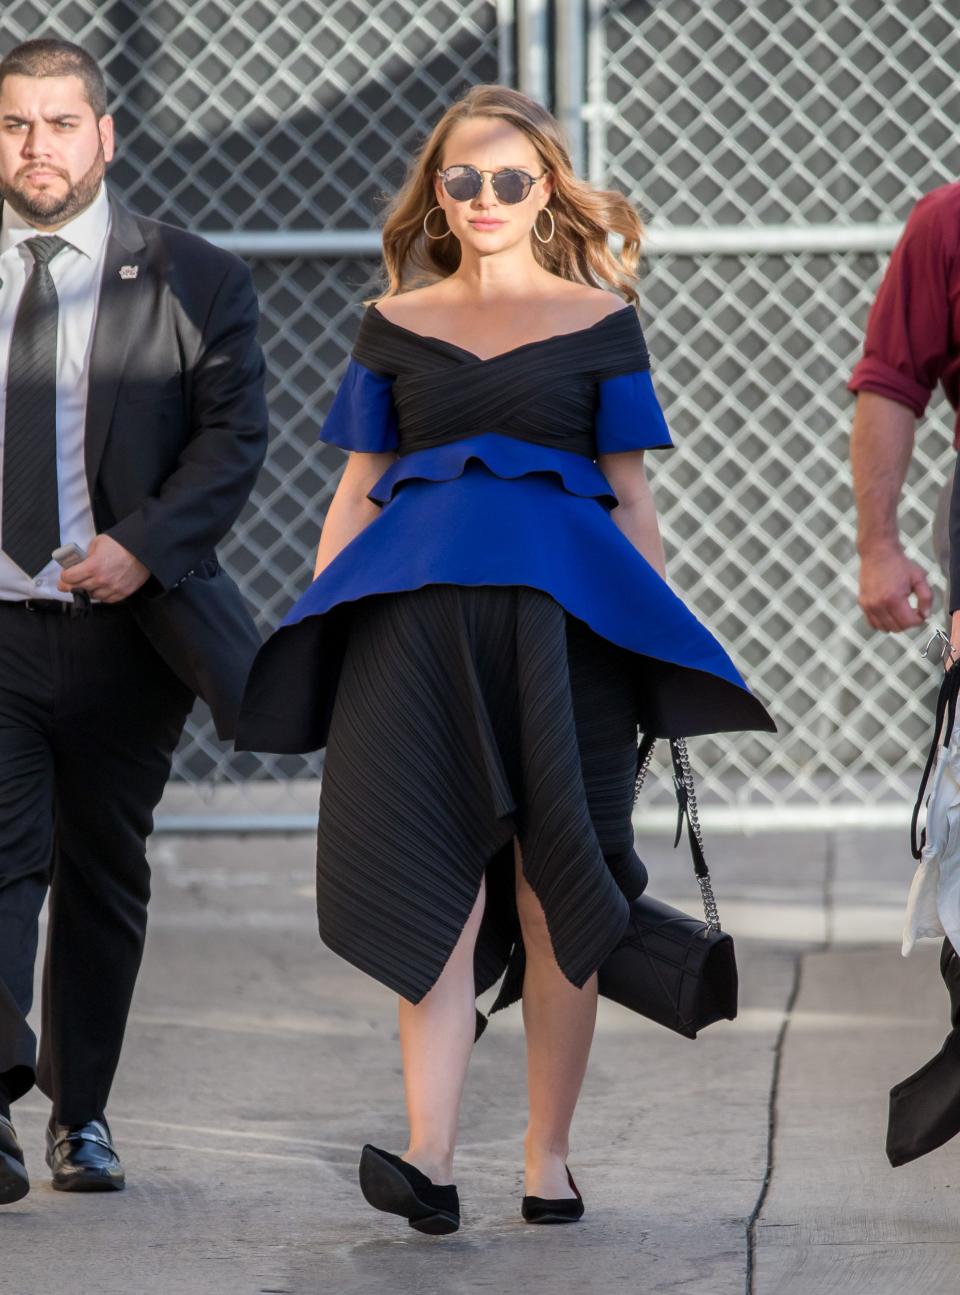 Natalie Portman in a black and blue dress and black flats